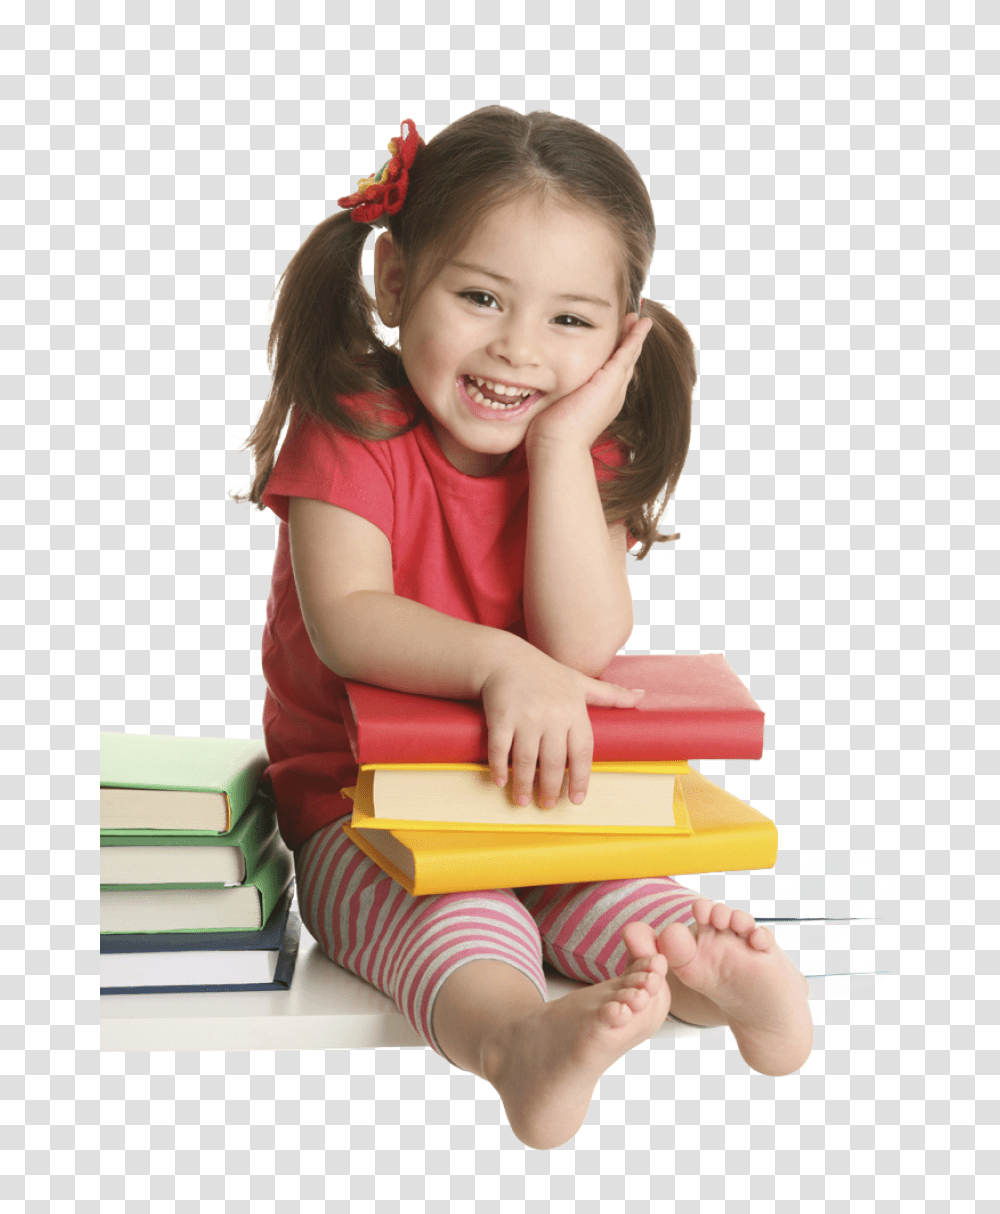 Child Image Play School Children, Person, Human, Female, Girl Transparent Png